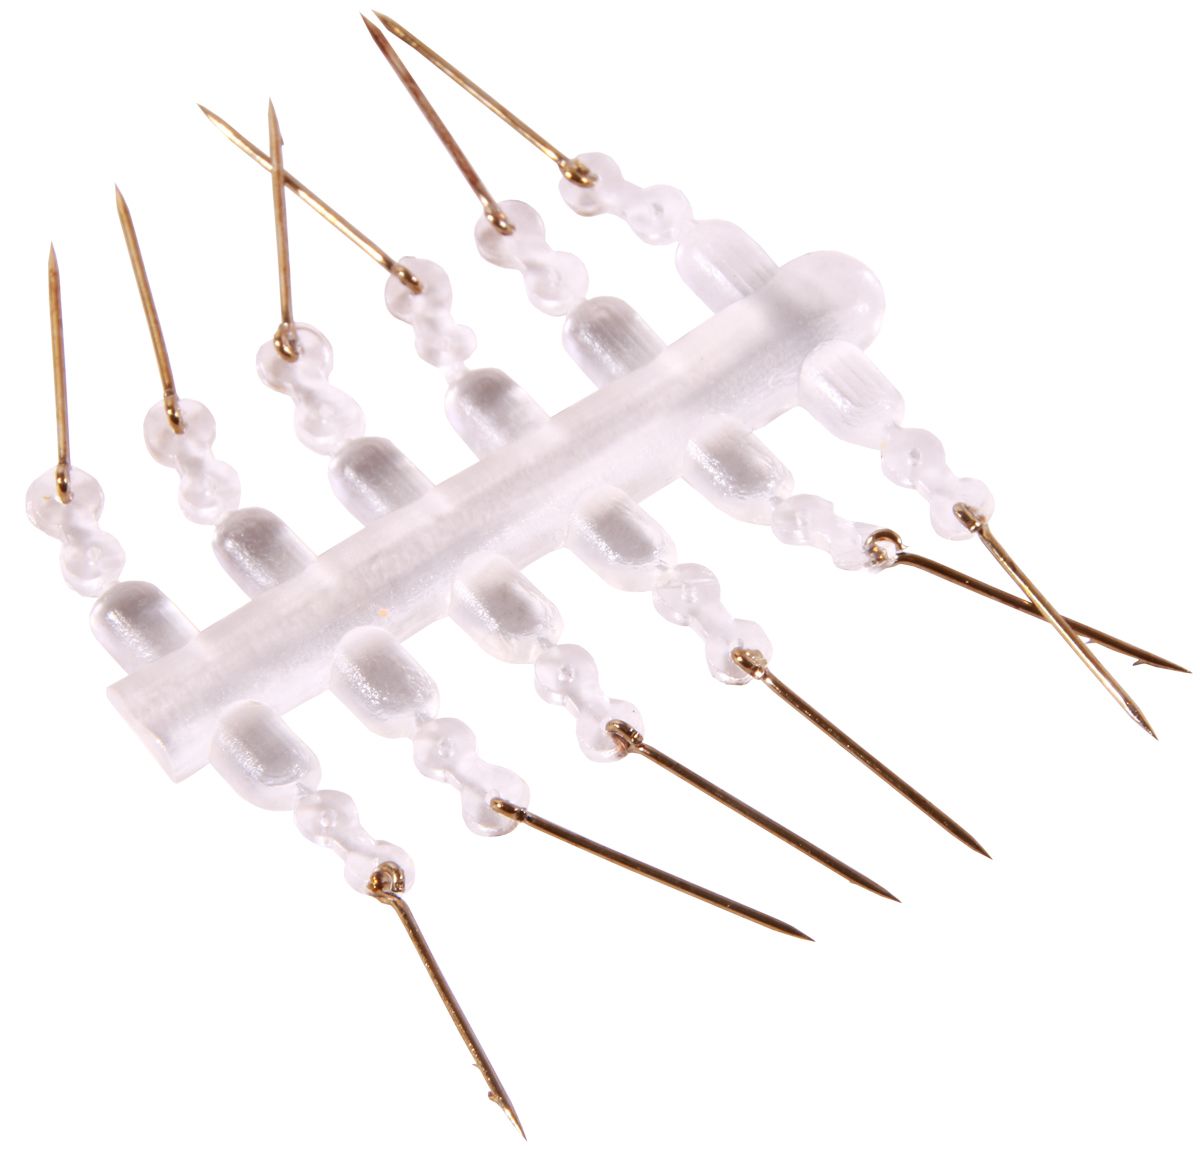 Ultimate Silicon Spike Hairs, 12 pcs